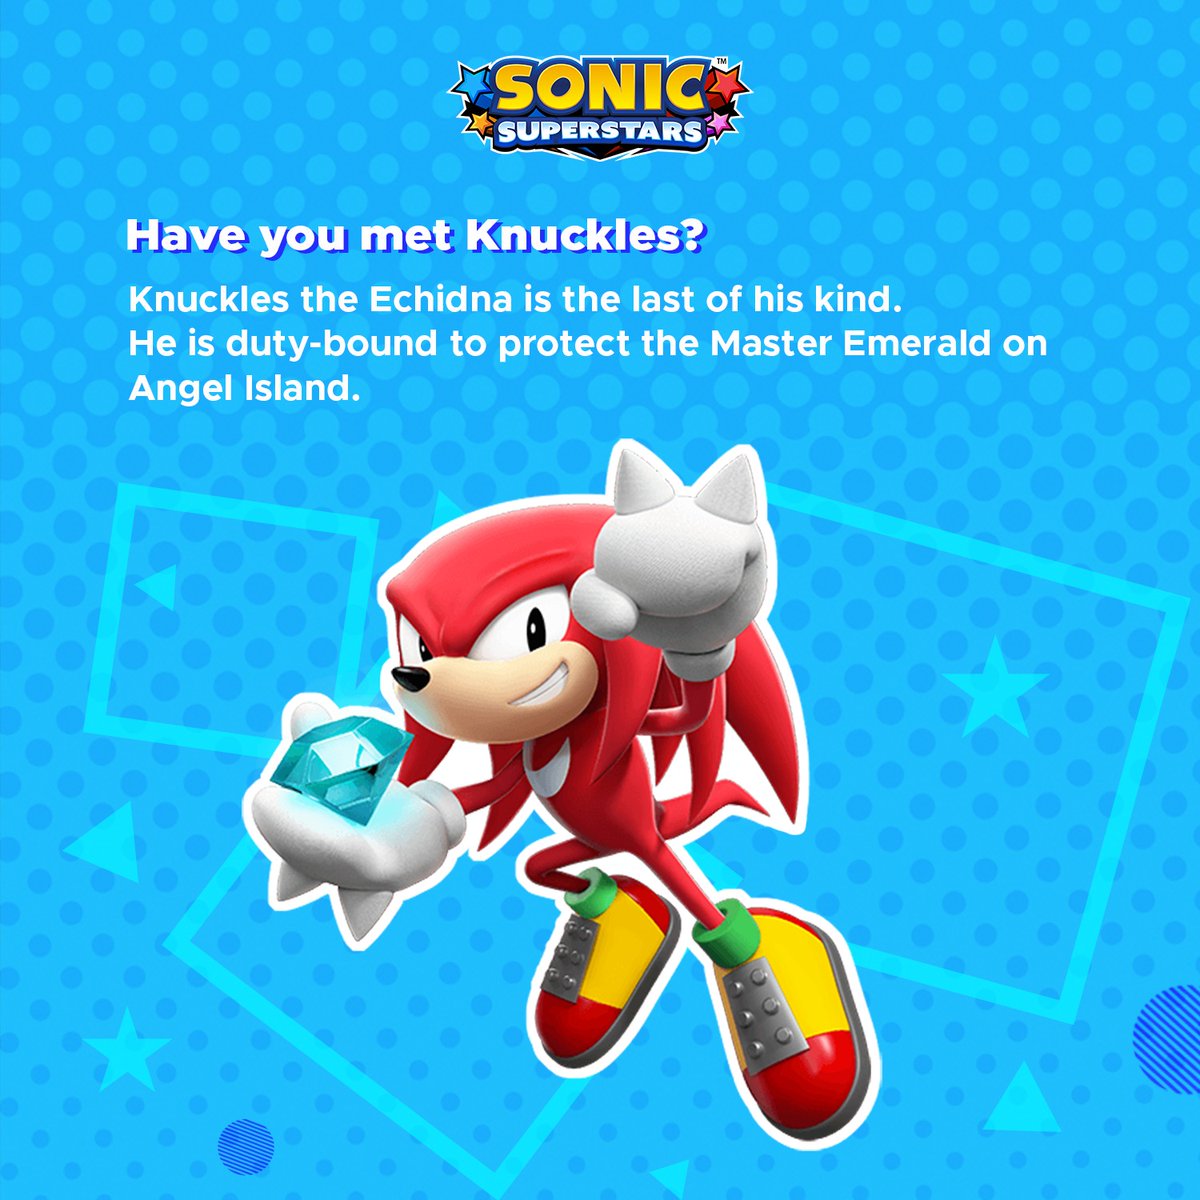 Are you familiar with everyone’s favorite red echidna?

With his considerable strength, he uses his spiked fists to climb walls and smash robots. And with his ability to glide, he can quickly get around his environment! 💪

#SonicSuperstars | #Sonic | #SonictheHedgehog